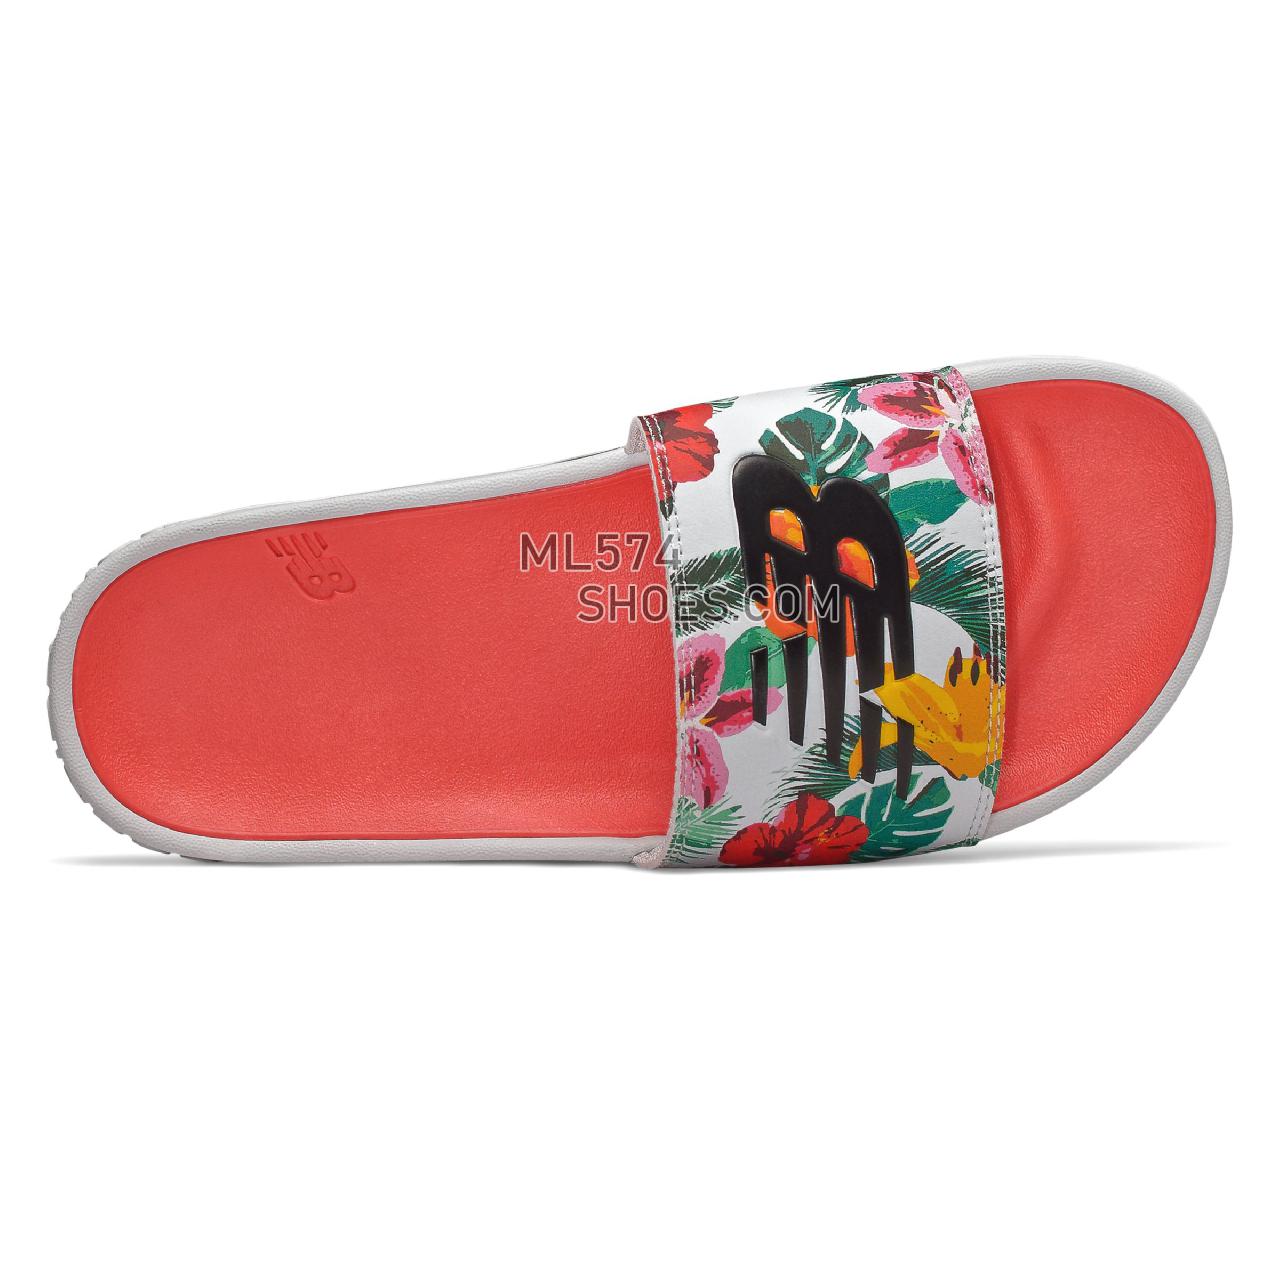 New Balance 200 - Women's Flip Flops - Floral with White and Black - SWF200WF